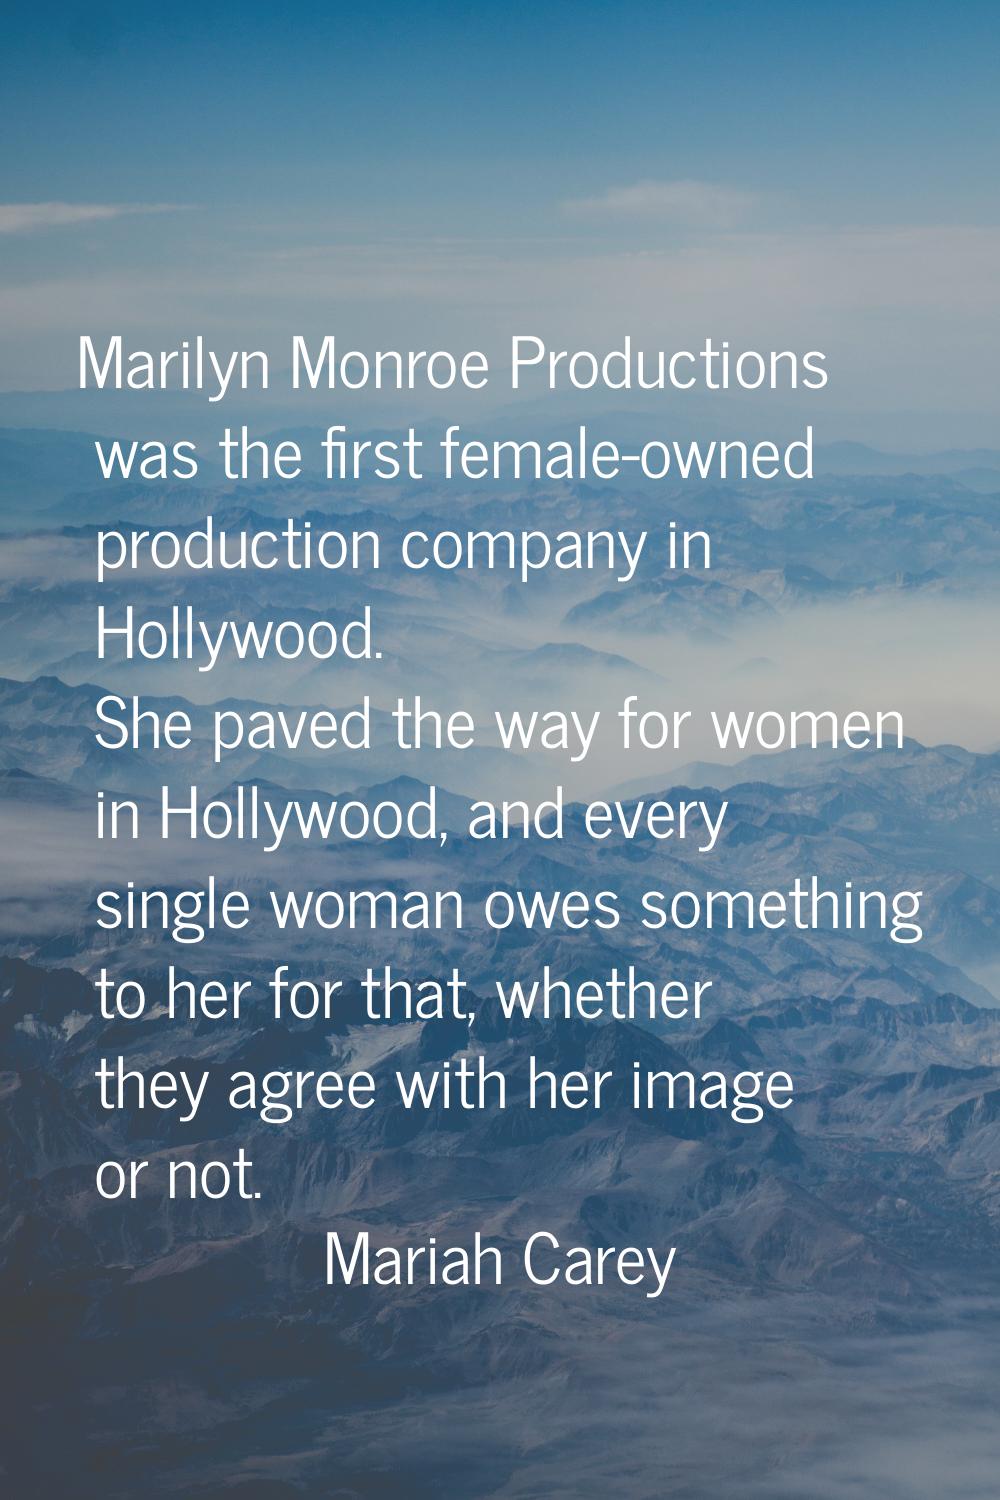 Marilyn Monroe Productions was the first female-owned production company in Hollywood. She paved th